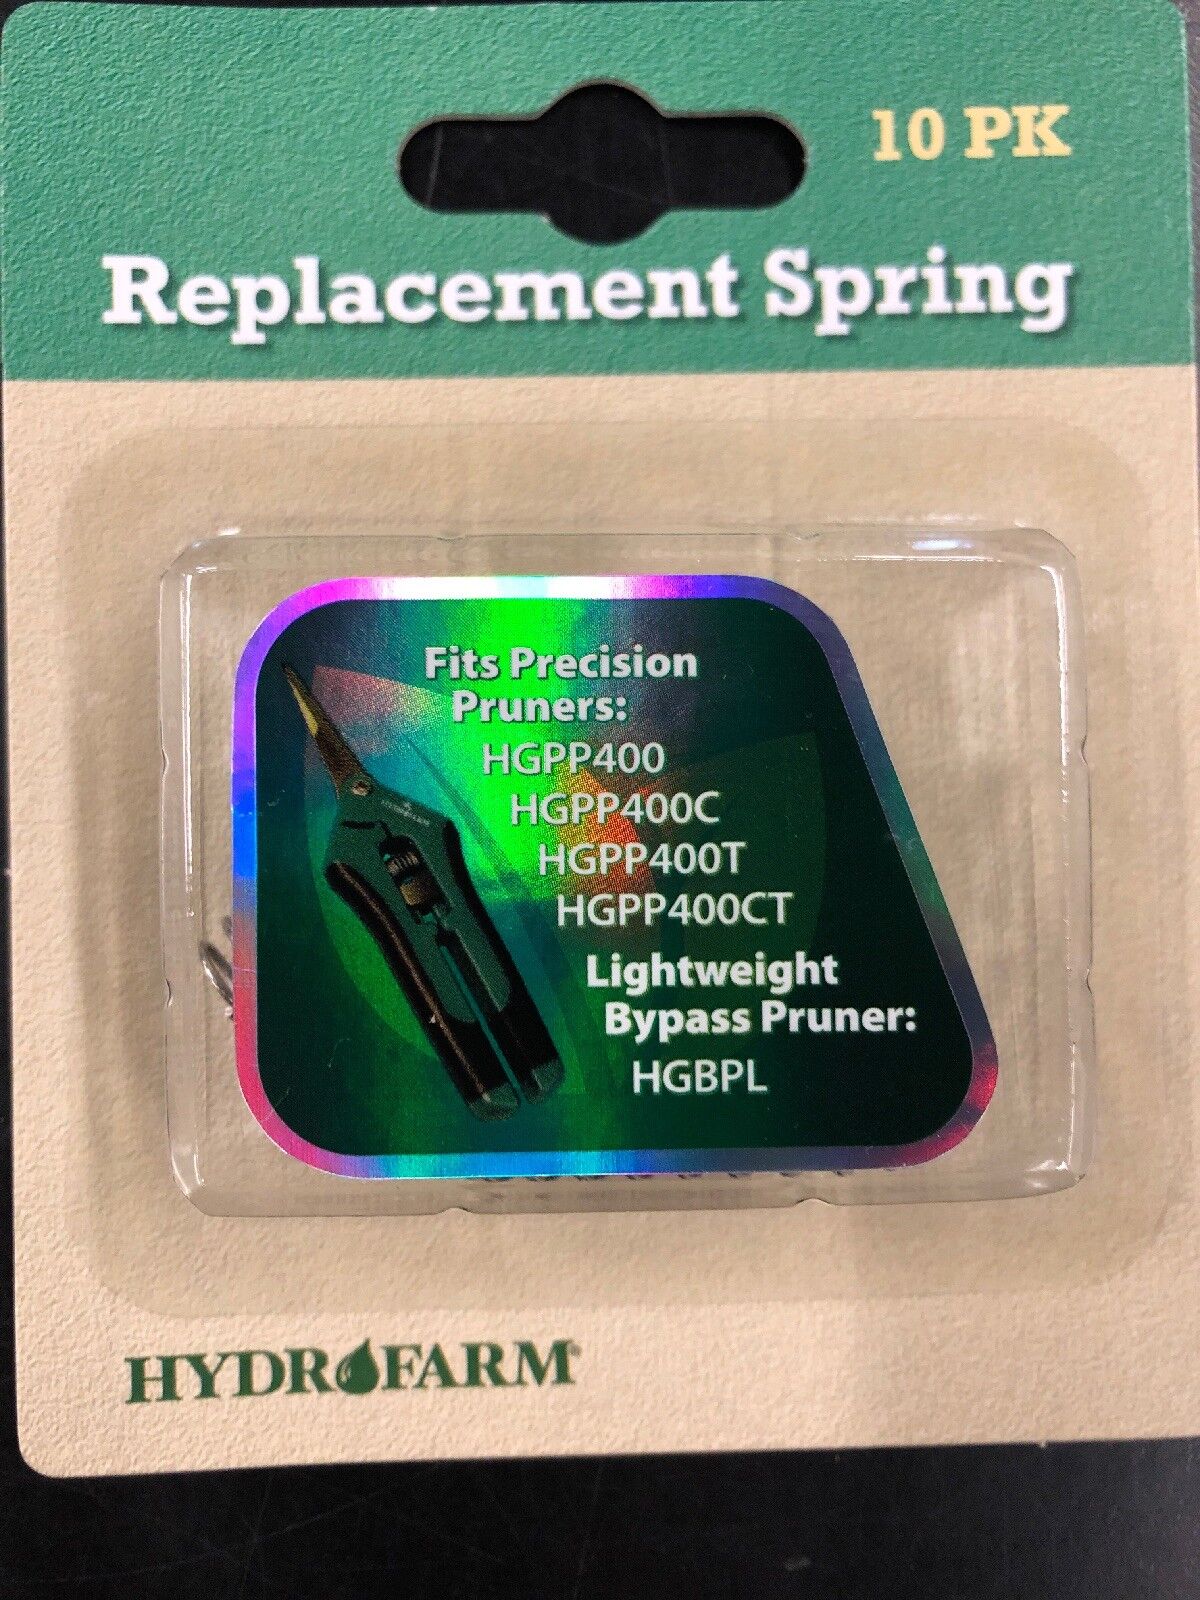 Hydrofarm Replacements Spring, 10 Pieces Per Pack NEW